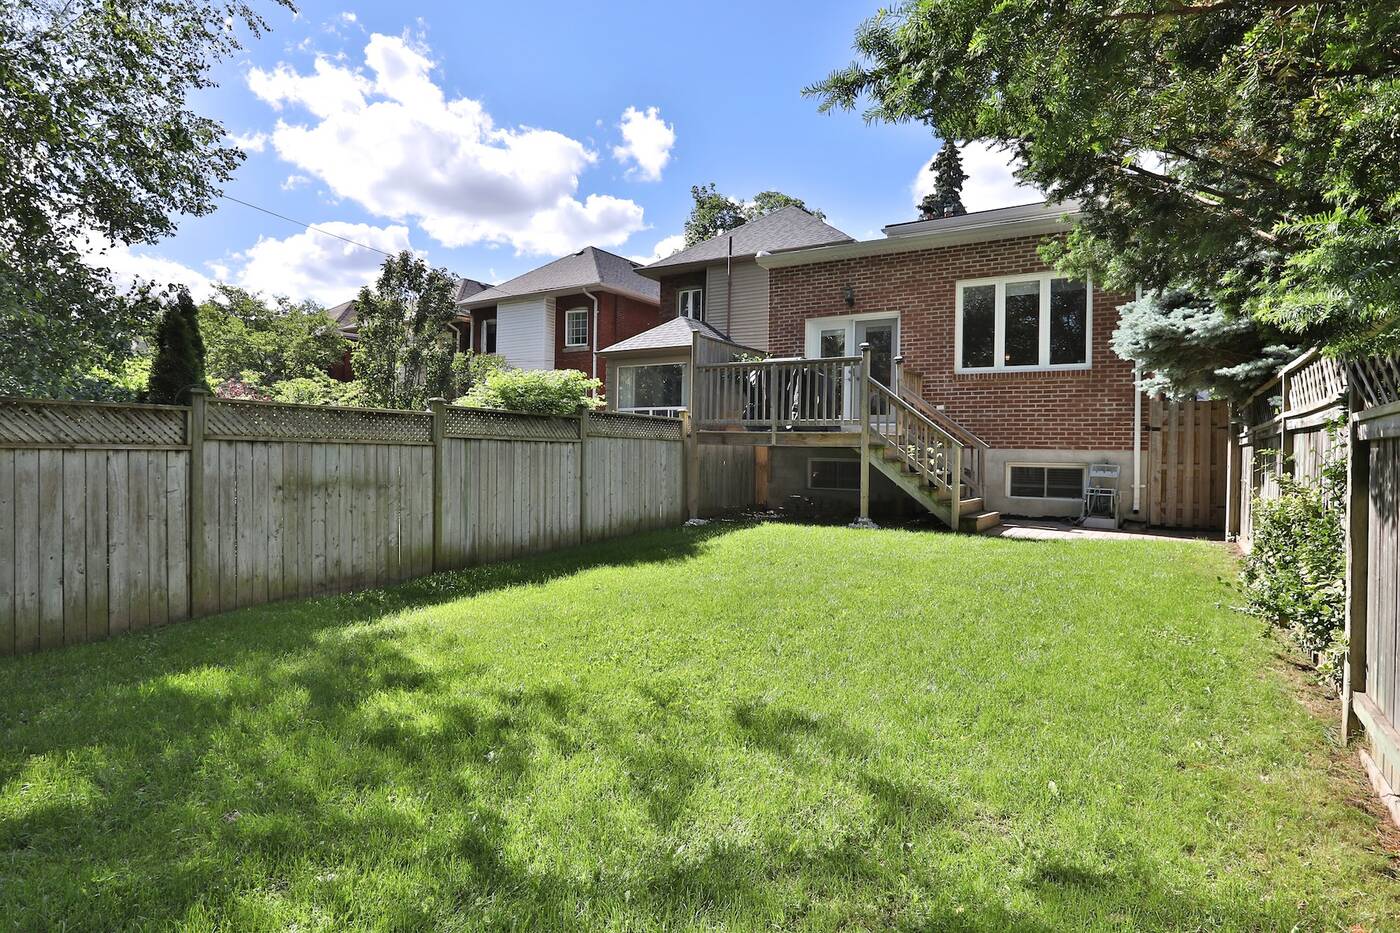 Sold! North Toronto home bucks trend at $542K over asking